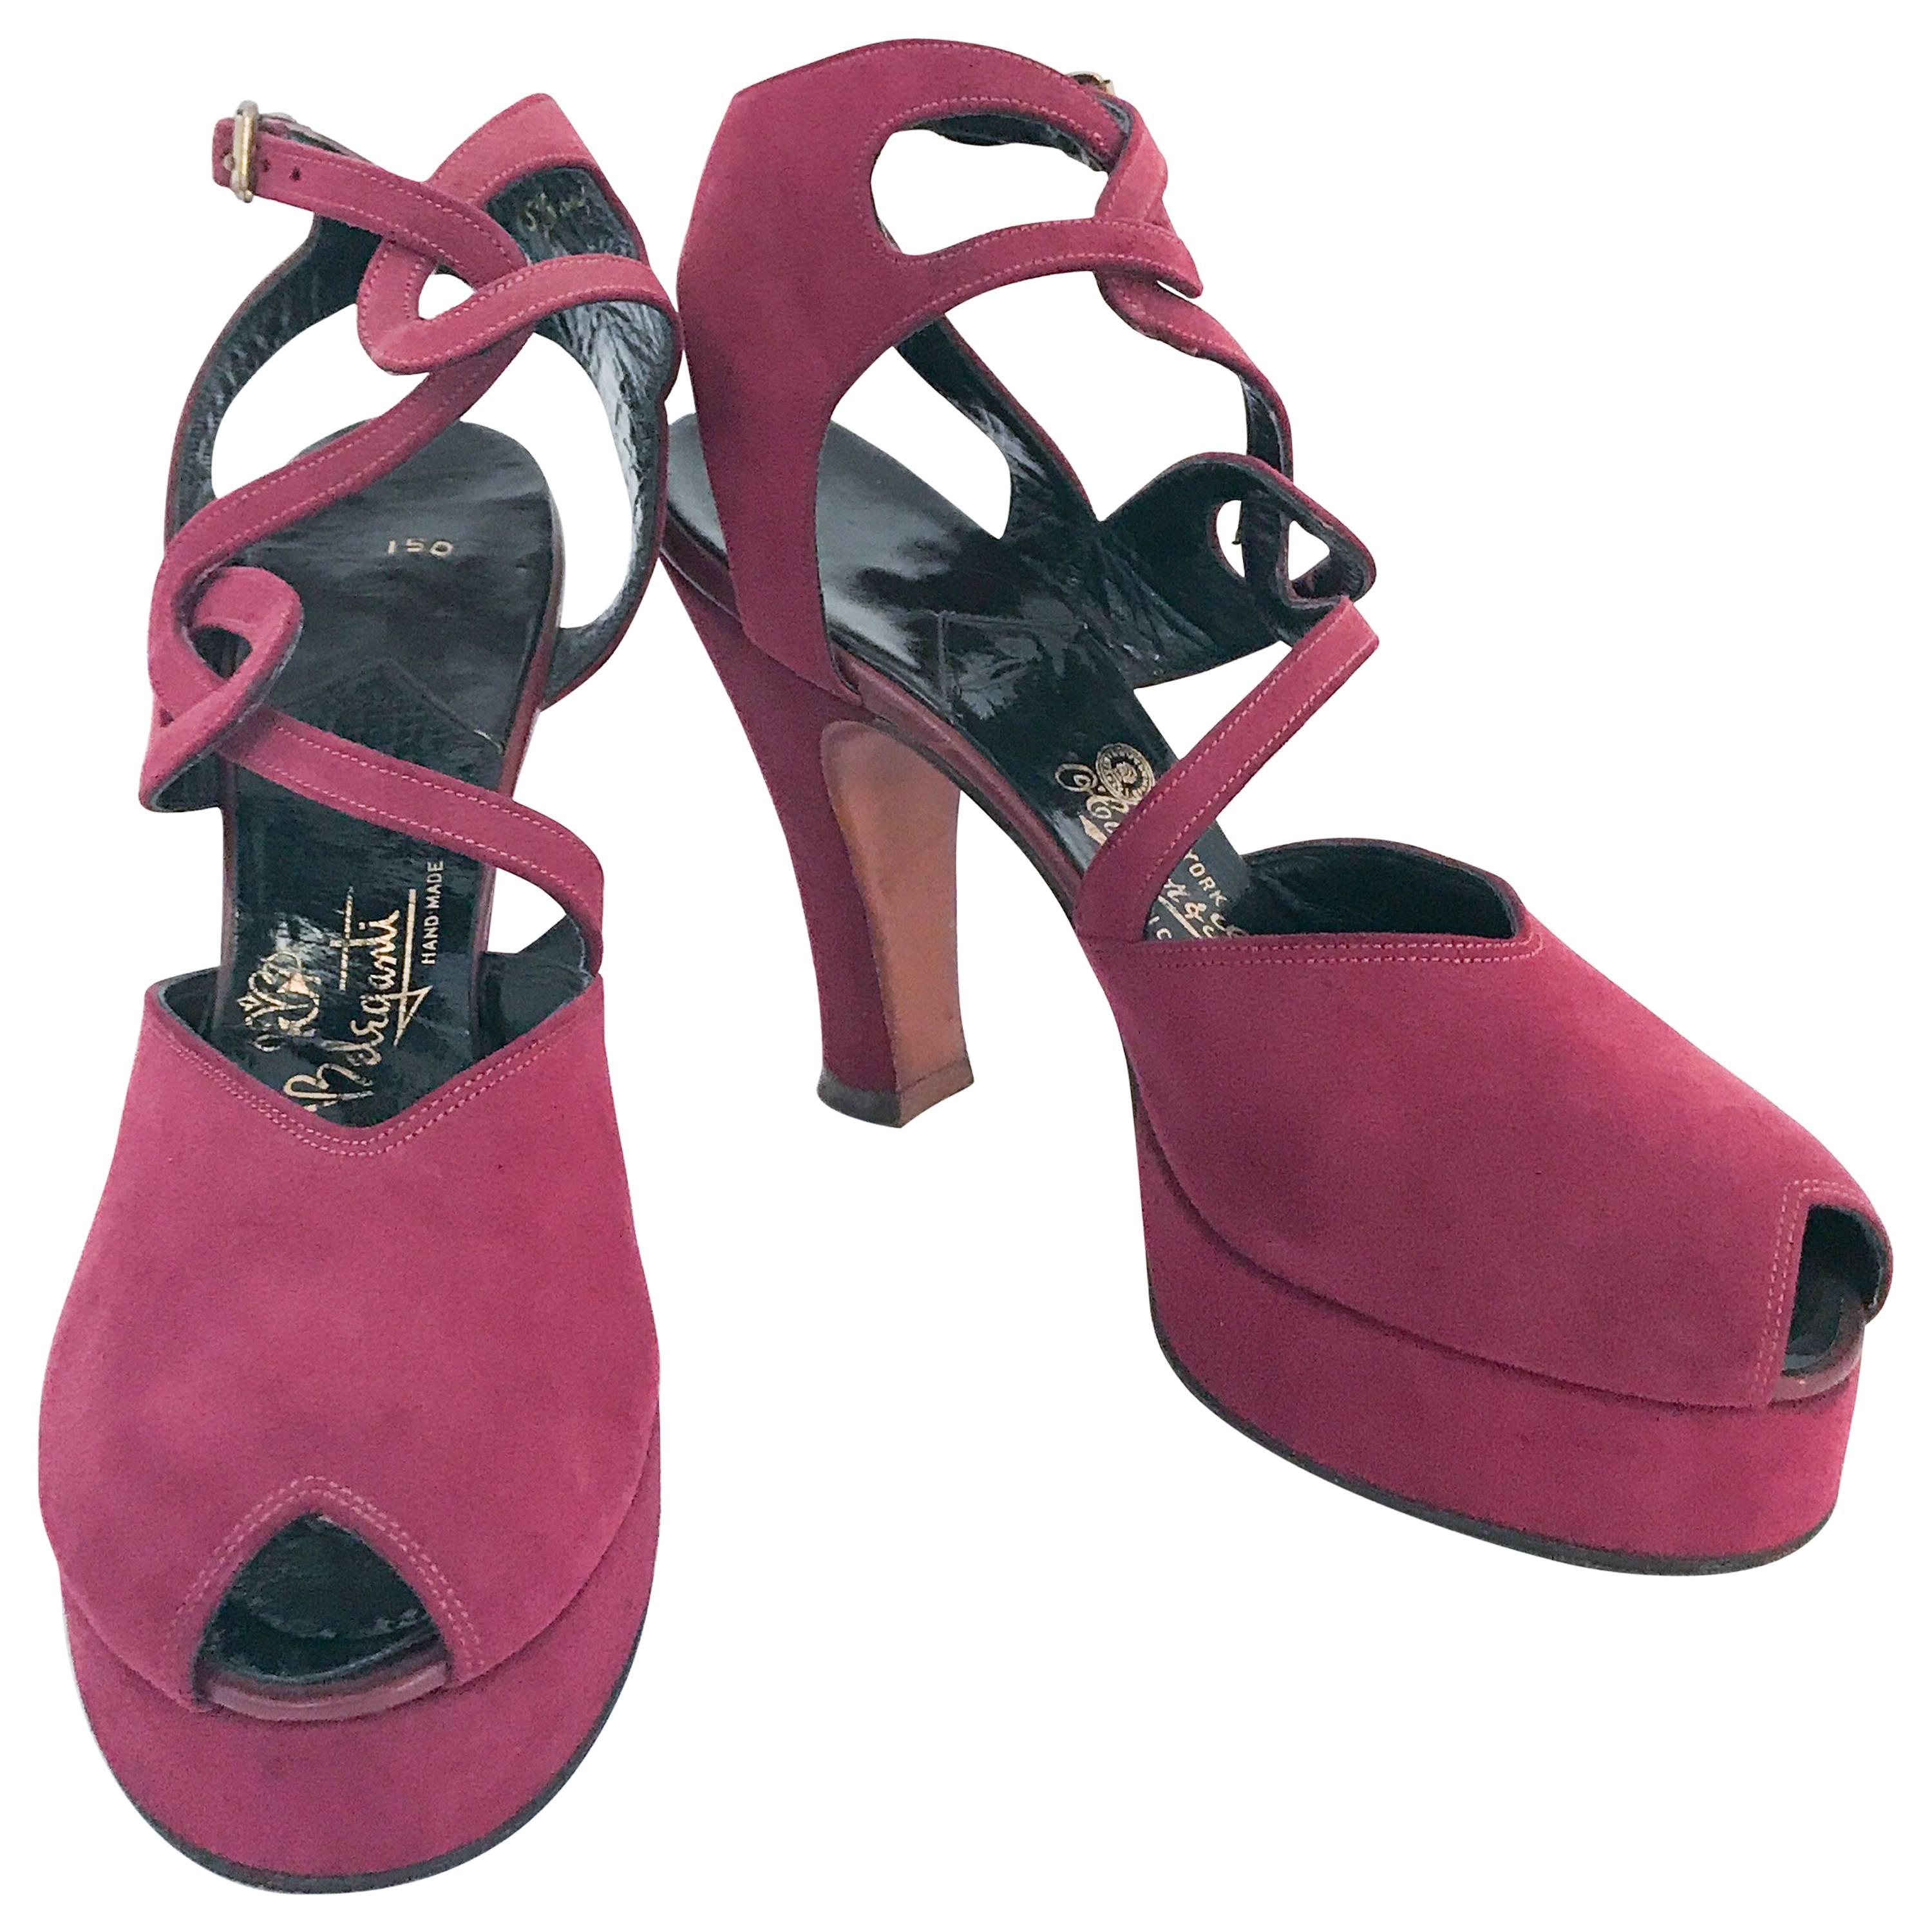 1947 Plum Suede Heels With Strap and Cut-out Accents